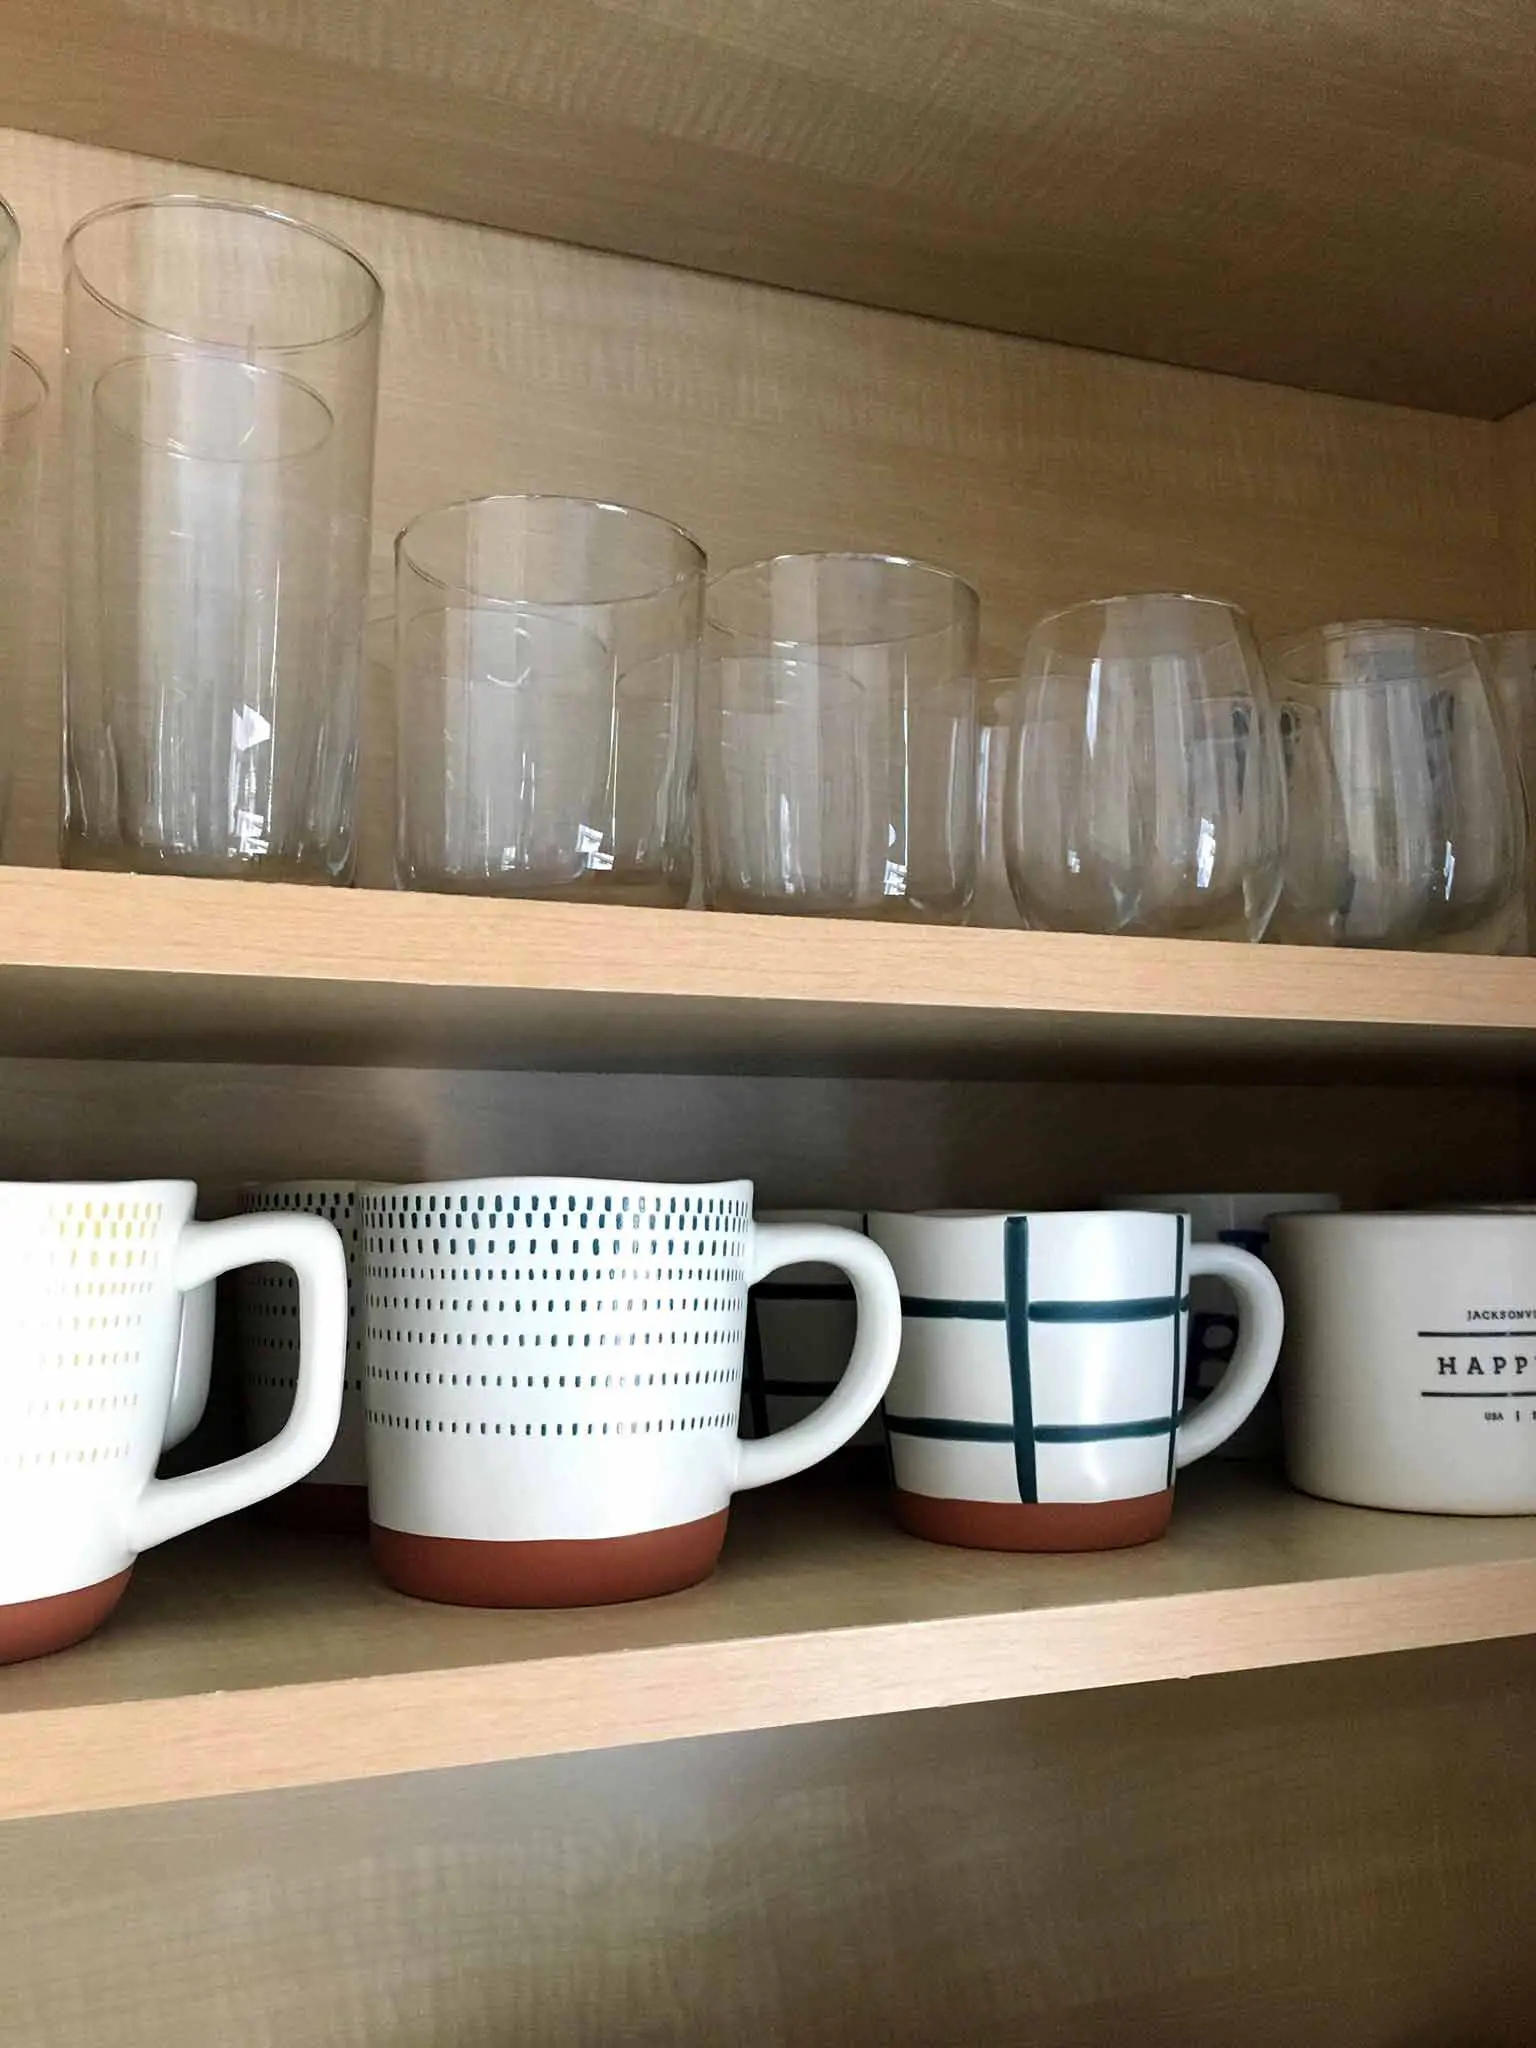 coffee mugs and glasses in kitchen cabinet